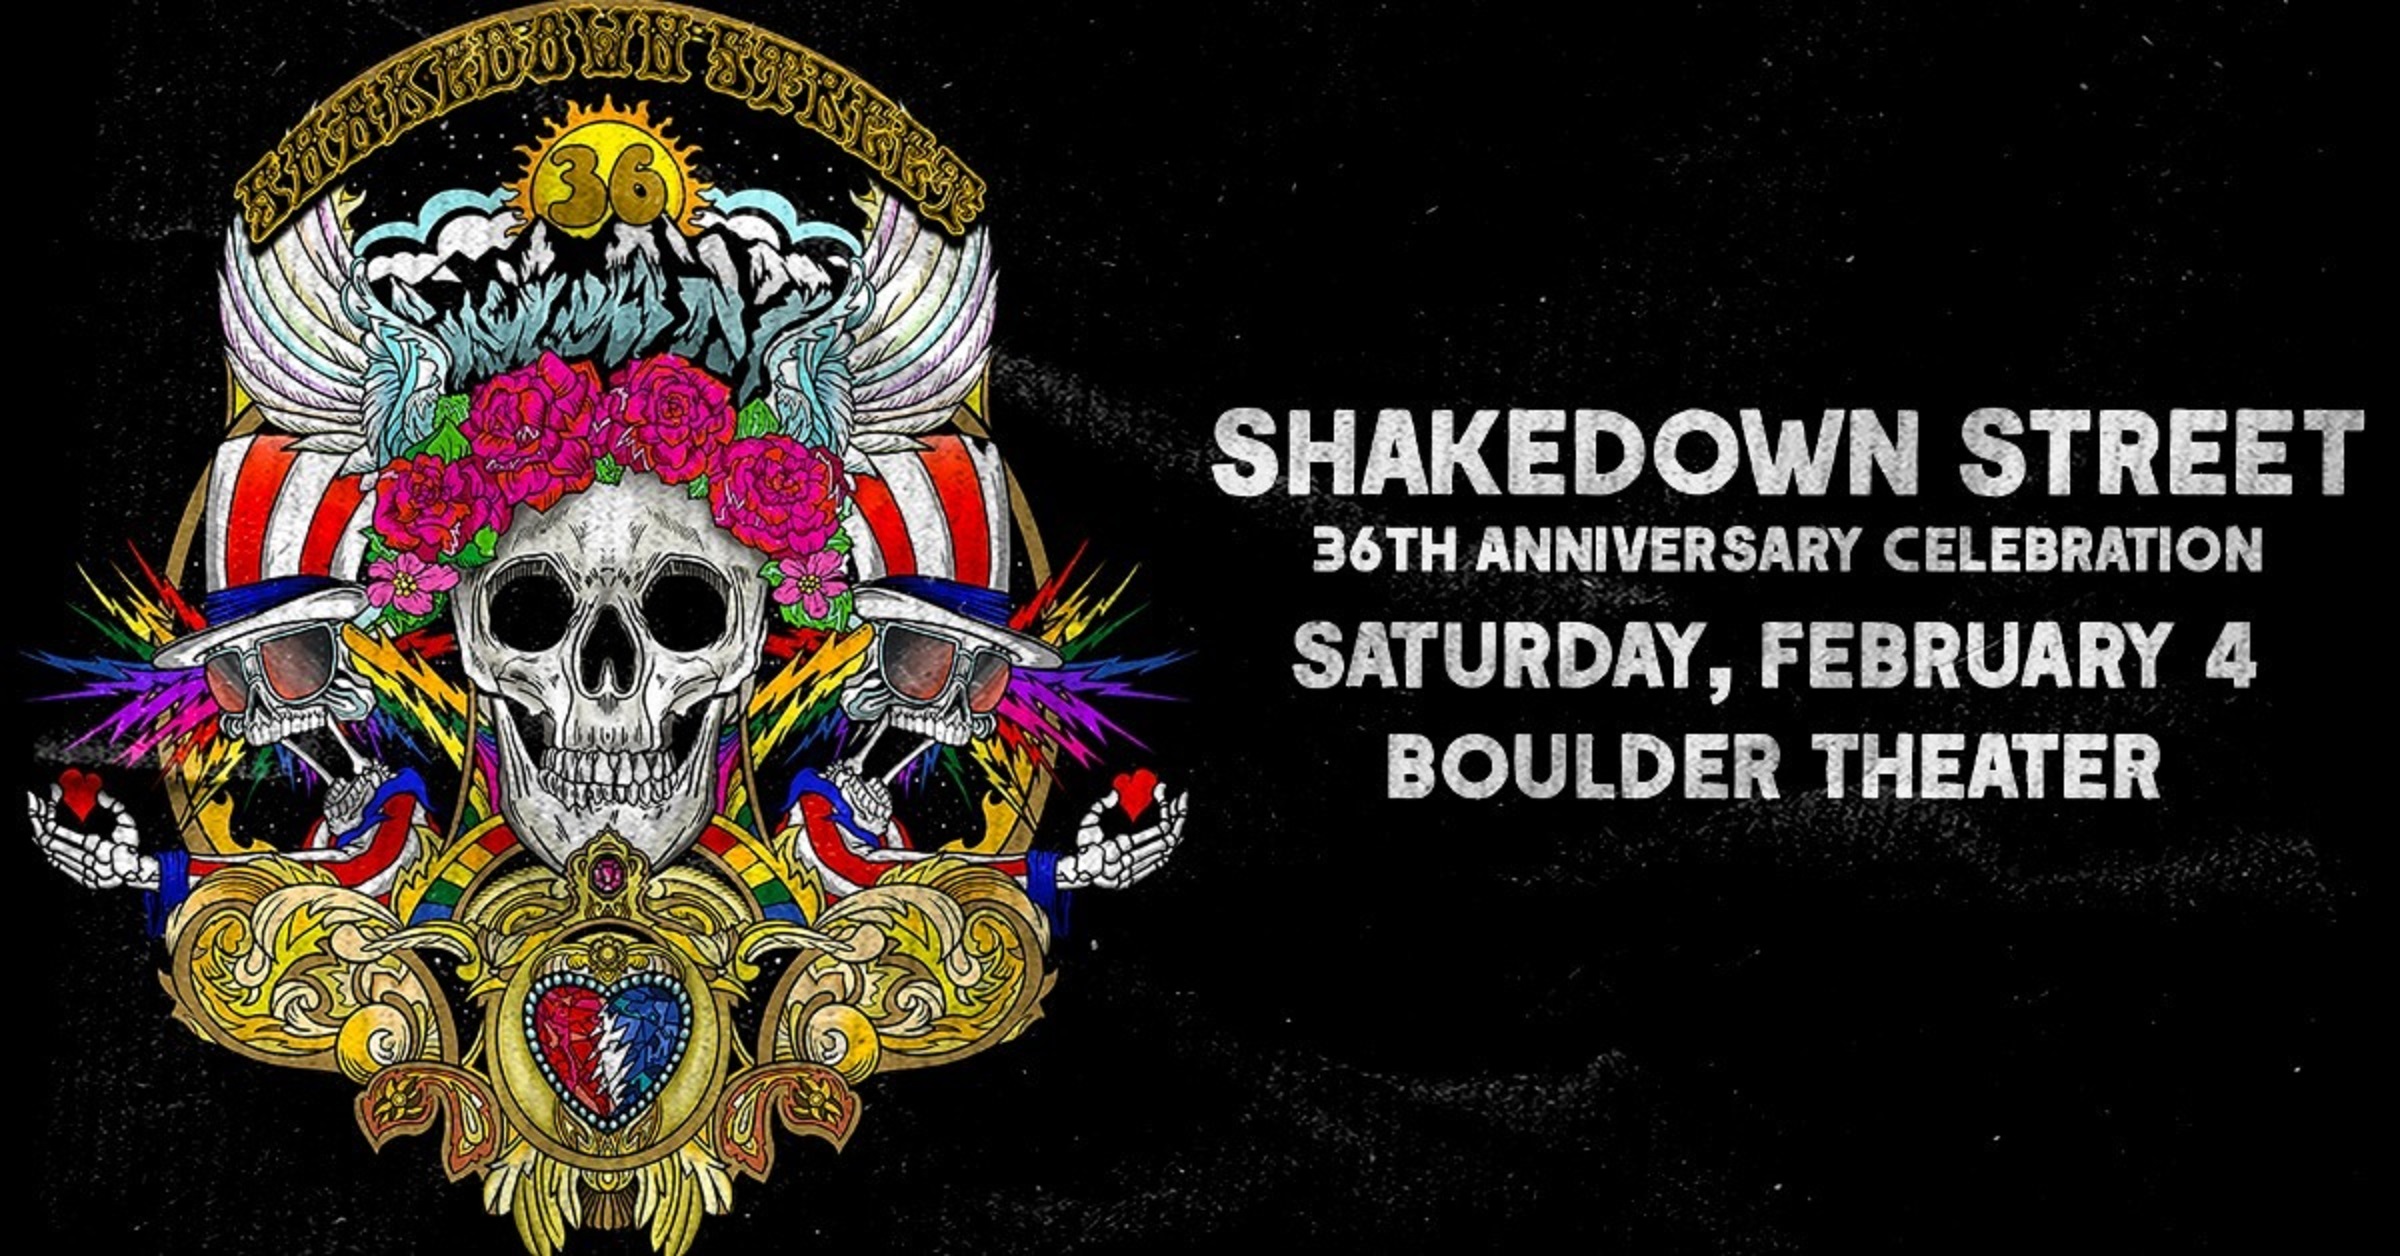 Shakedown Street will celebrate its 36th Anniversary at Boulder Theater